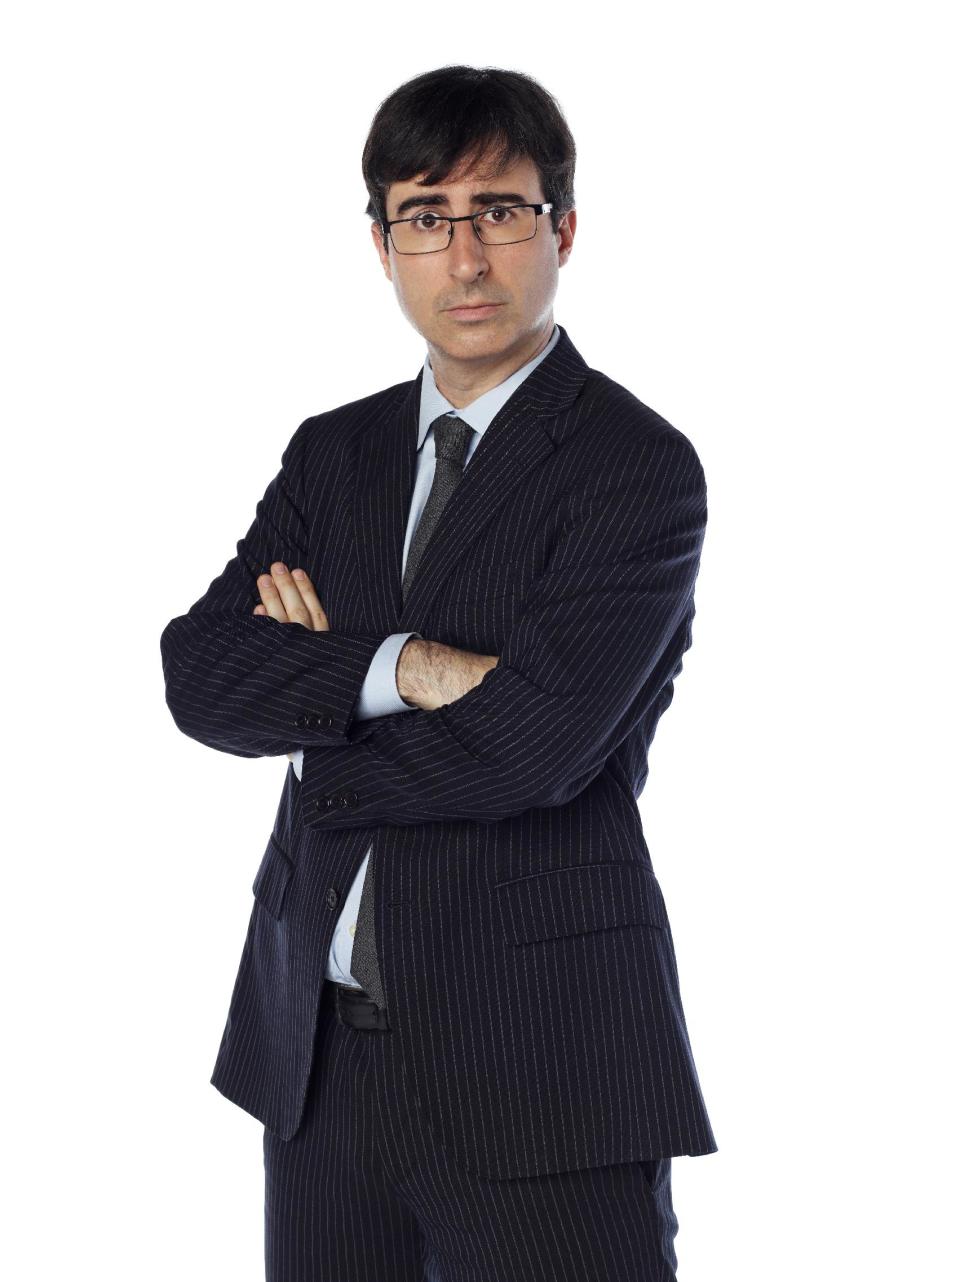 This undated image released by Comedy Central shows John Oliver, a correspondent from "The Daily Show with Jon Stewart." Oliver will temporarily replace host Jon Stewart on the popular spoof news show while Stewart directs and produces the film, "Rosewater." (AP Photo/Comedy Central, Martin Crook)